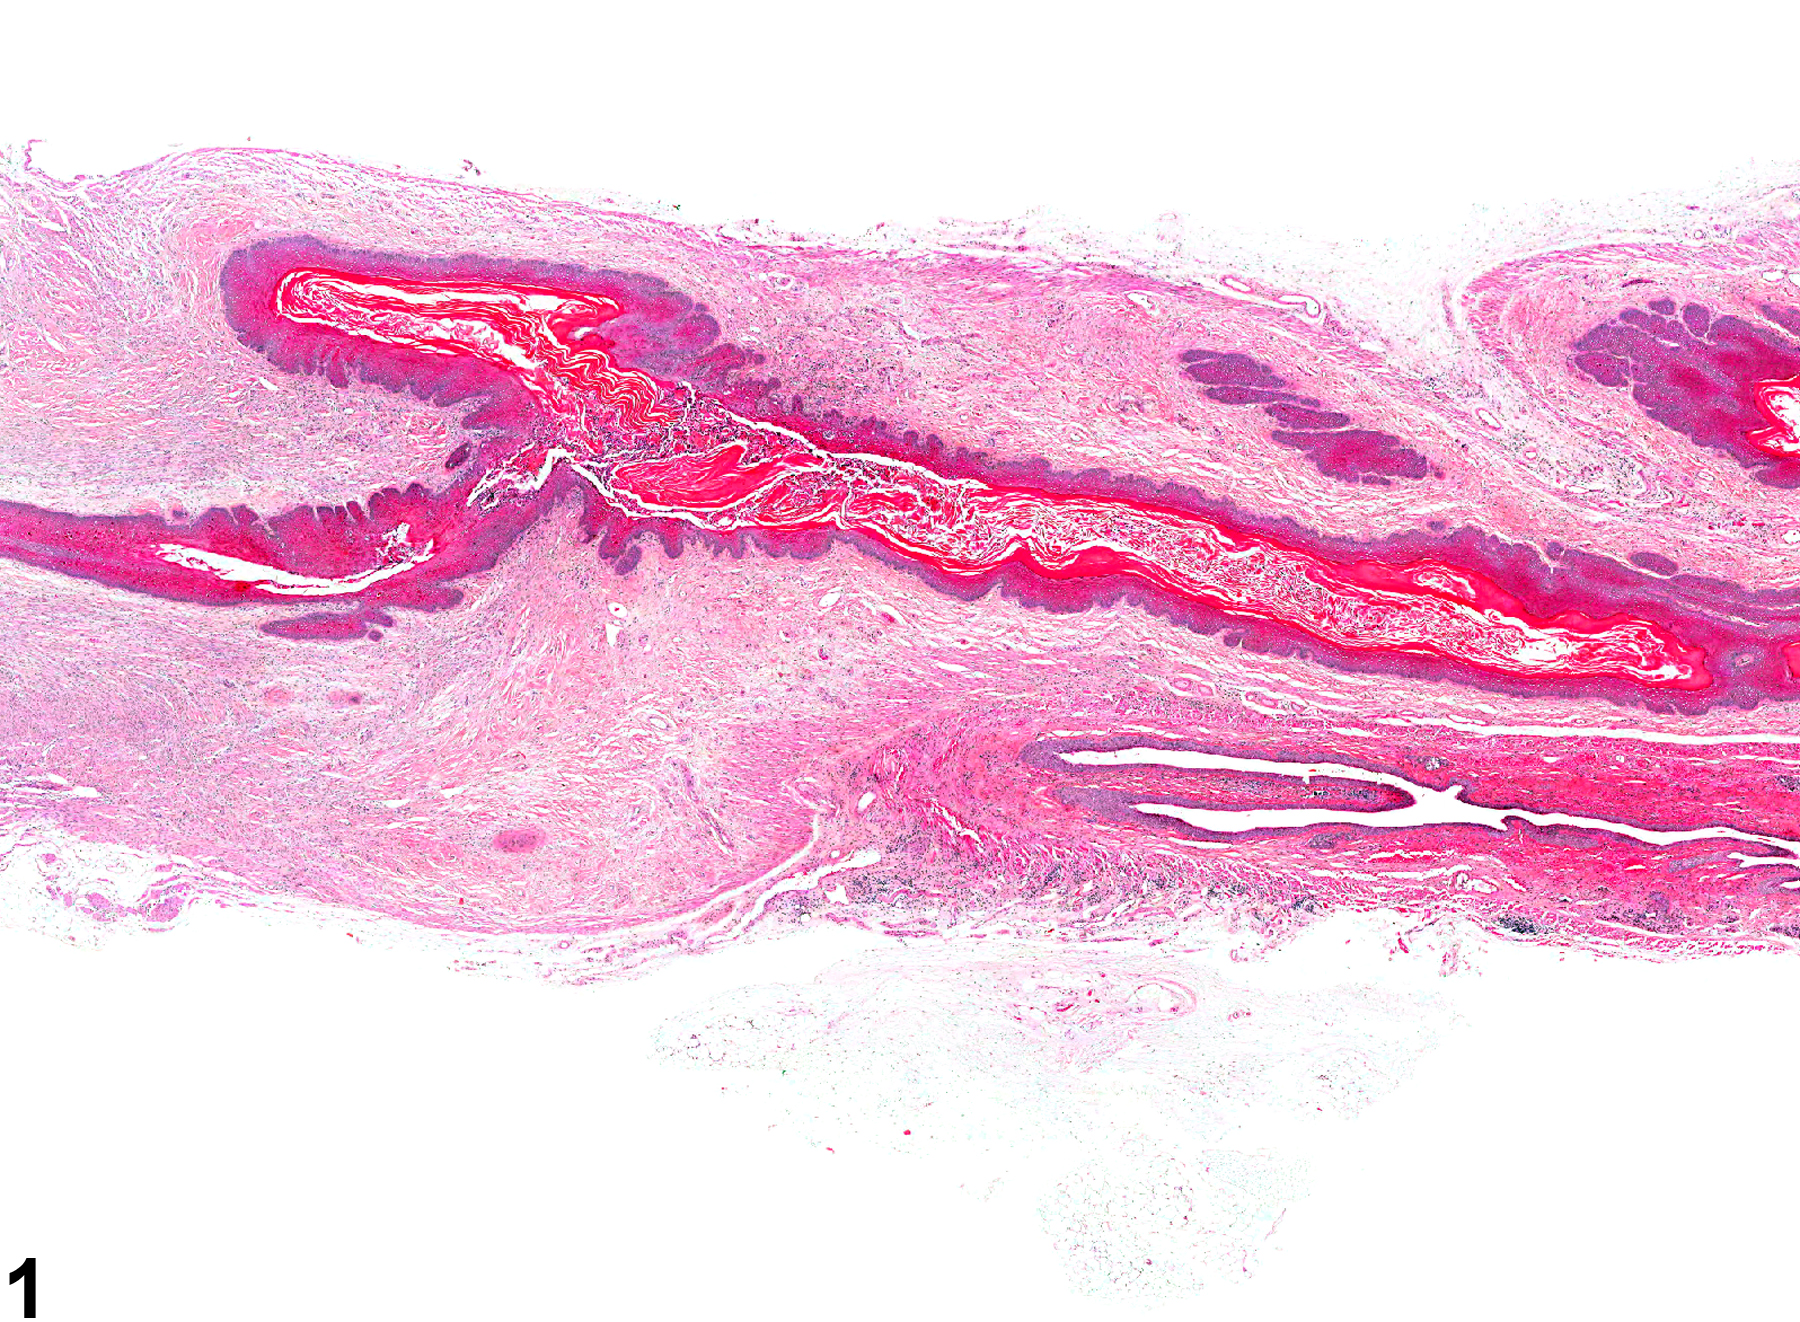 Image of fibrosis in the vagina from a female B6C3F1 mouse in a chronic study